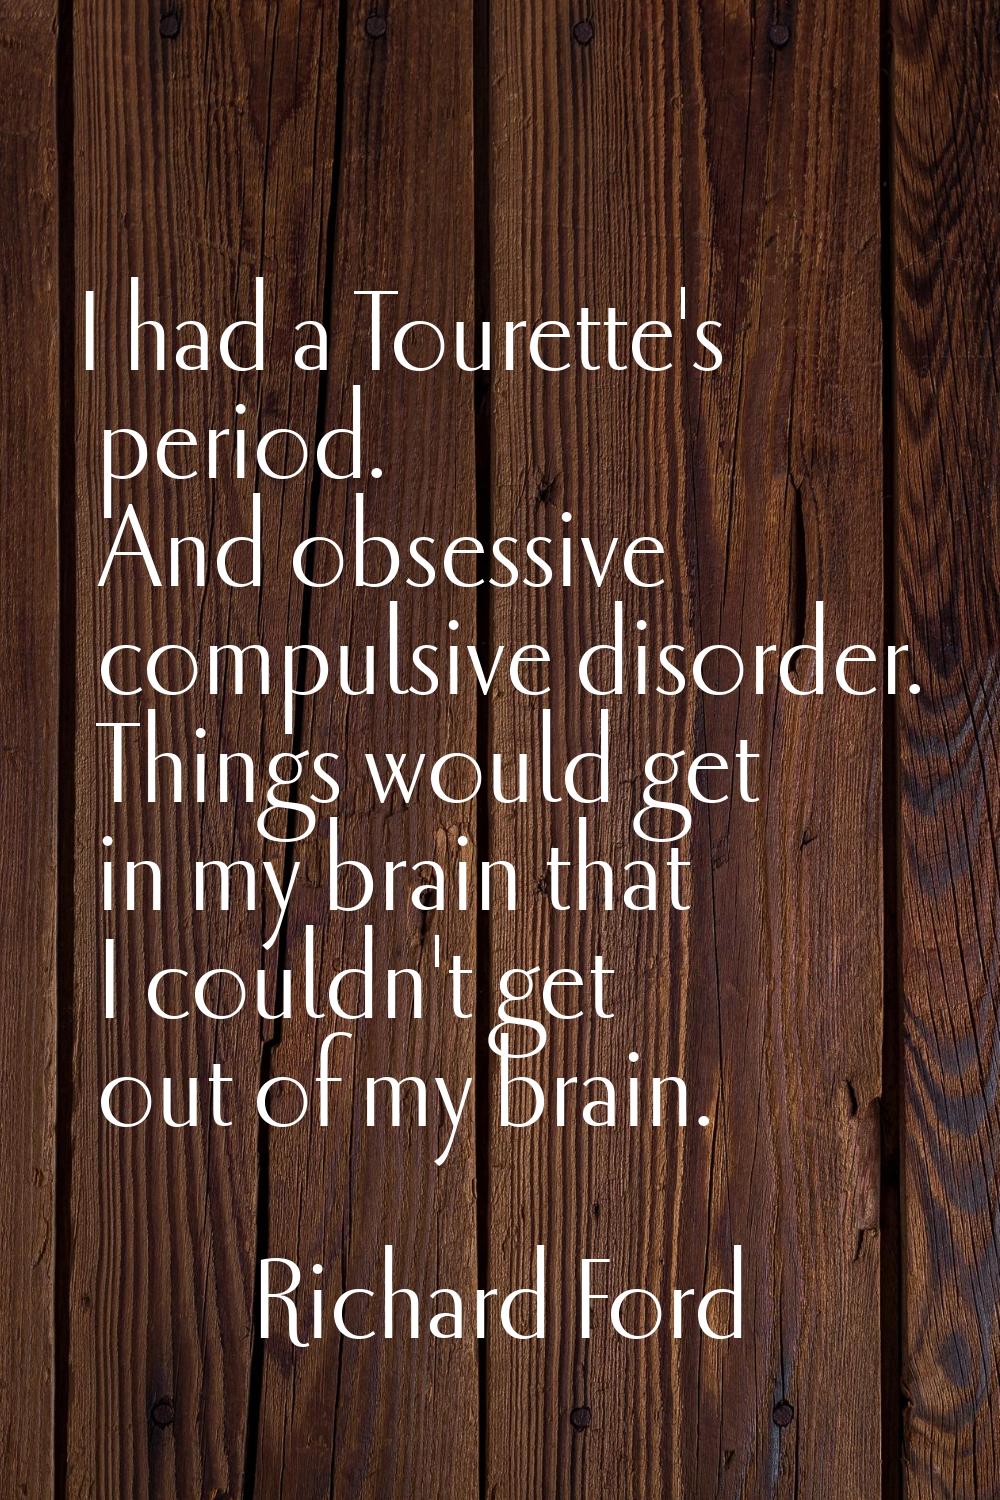 I had a Tourette's period. And obsessive compulsive disorder. Things would get in my brain that I c